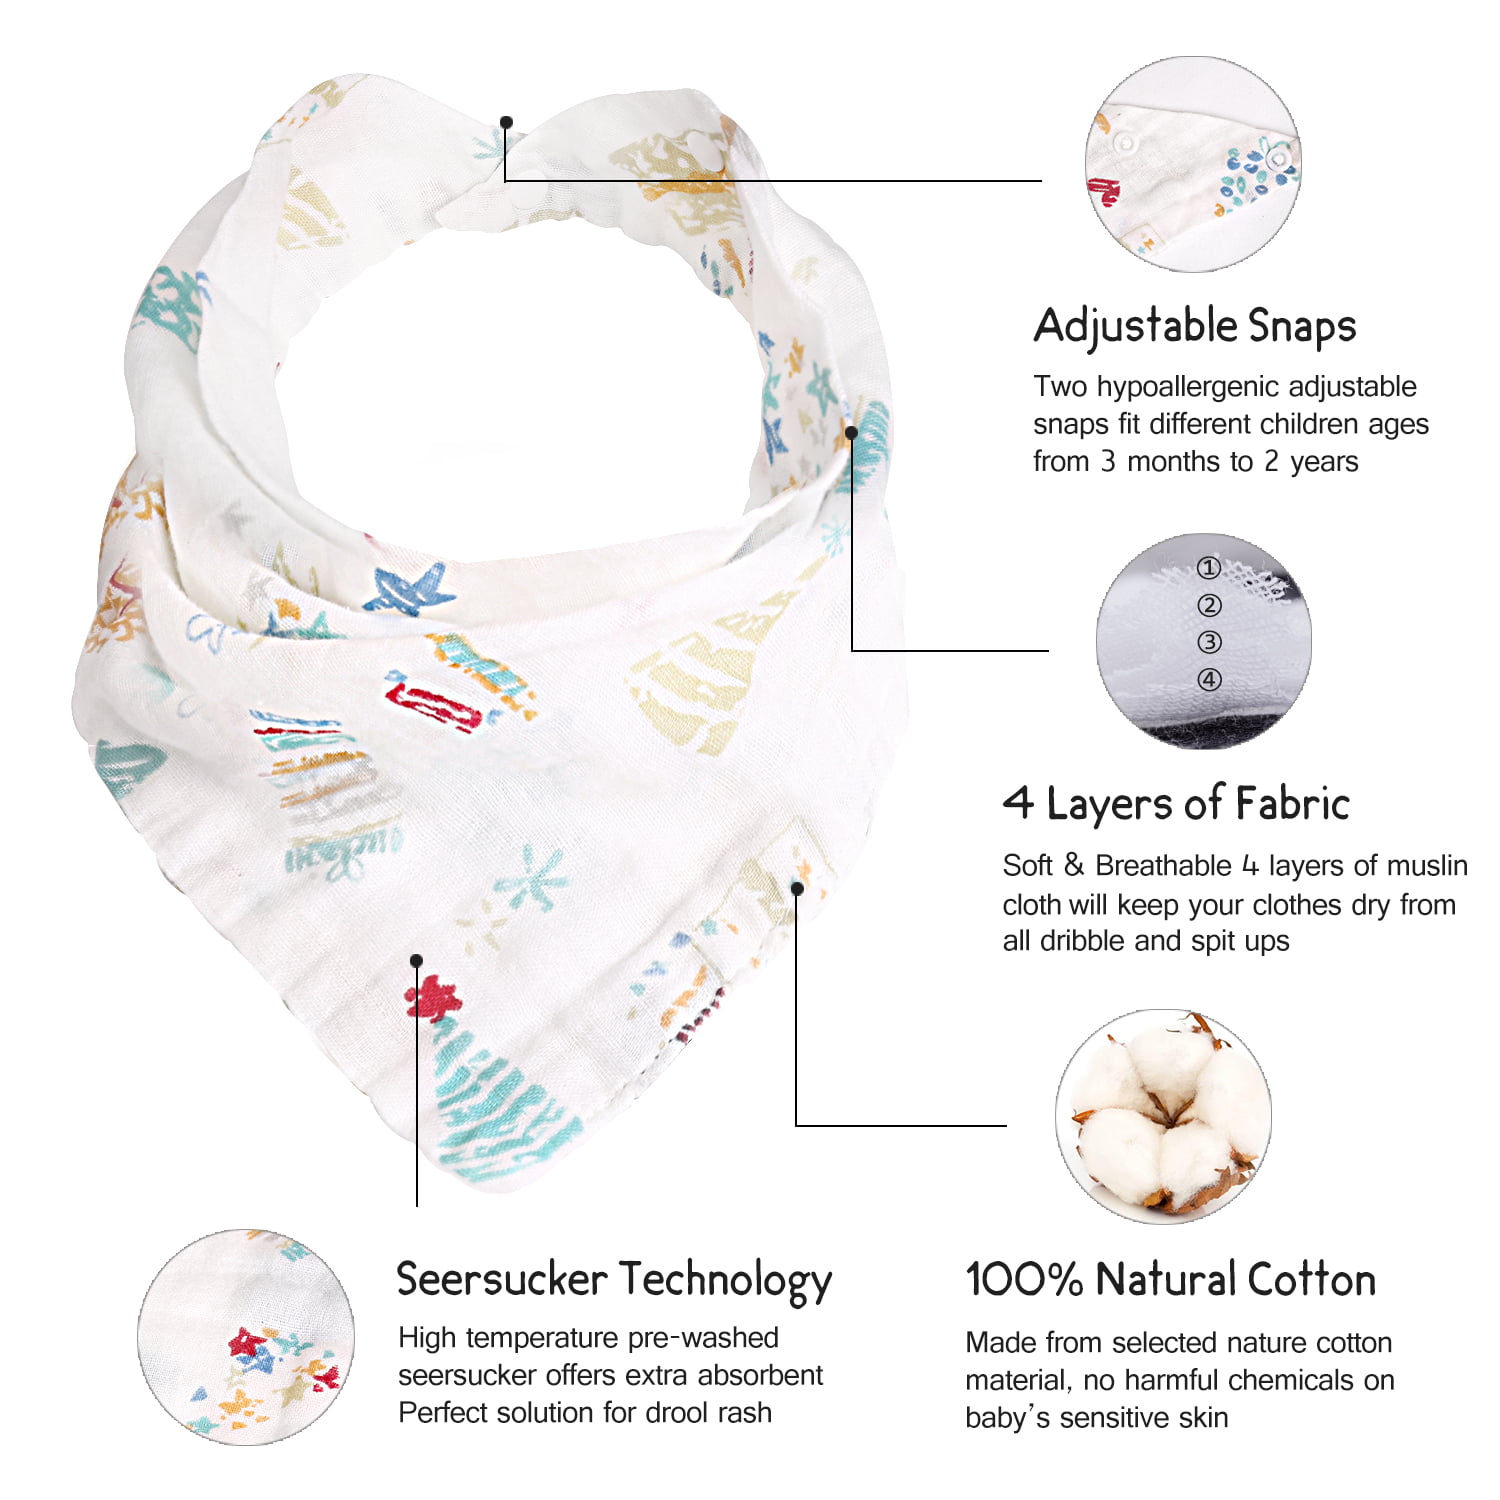 Muslin Baby Bandana Drooling Bibs Absorbent Adjustable Breathable Soft Bibs with Snap Closures Double Layer Cotton Scarf Bibs Keep Dry for Unisex Babies Newborns Infants Toddlers Heavy Droolers 